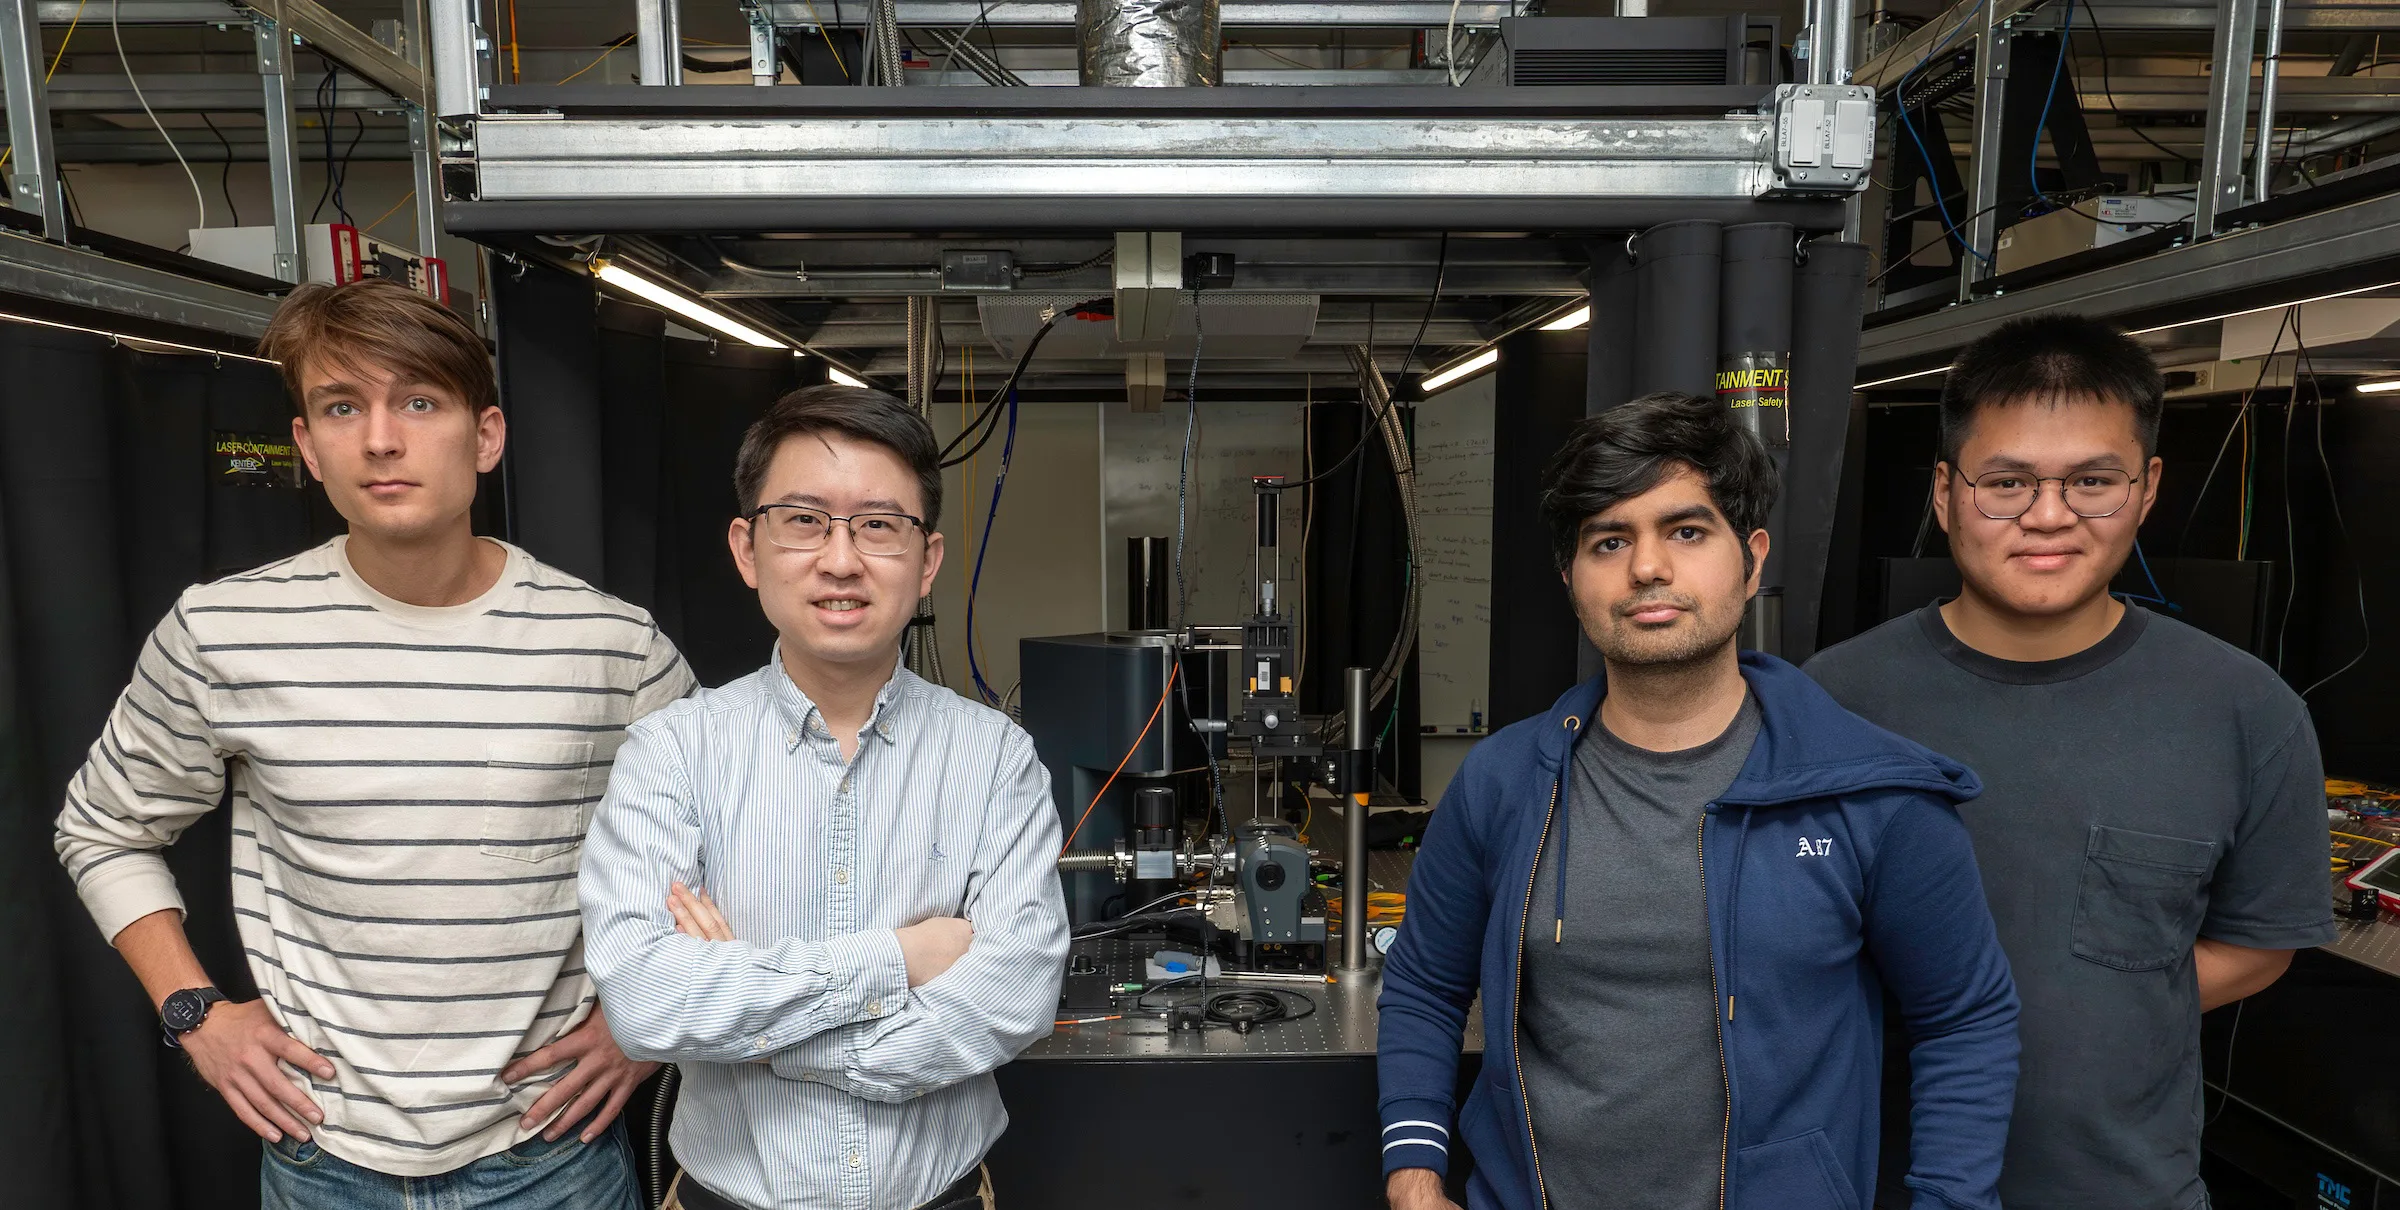 Rice University Engineers Boost Photon Emission, Paving Way For Quantum Networks